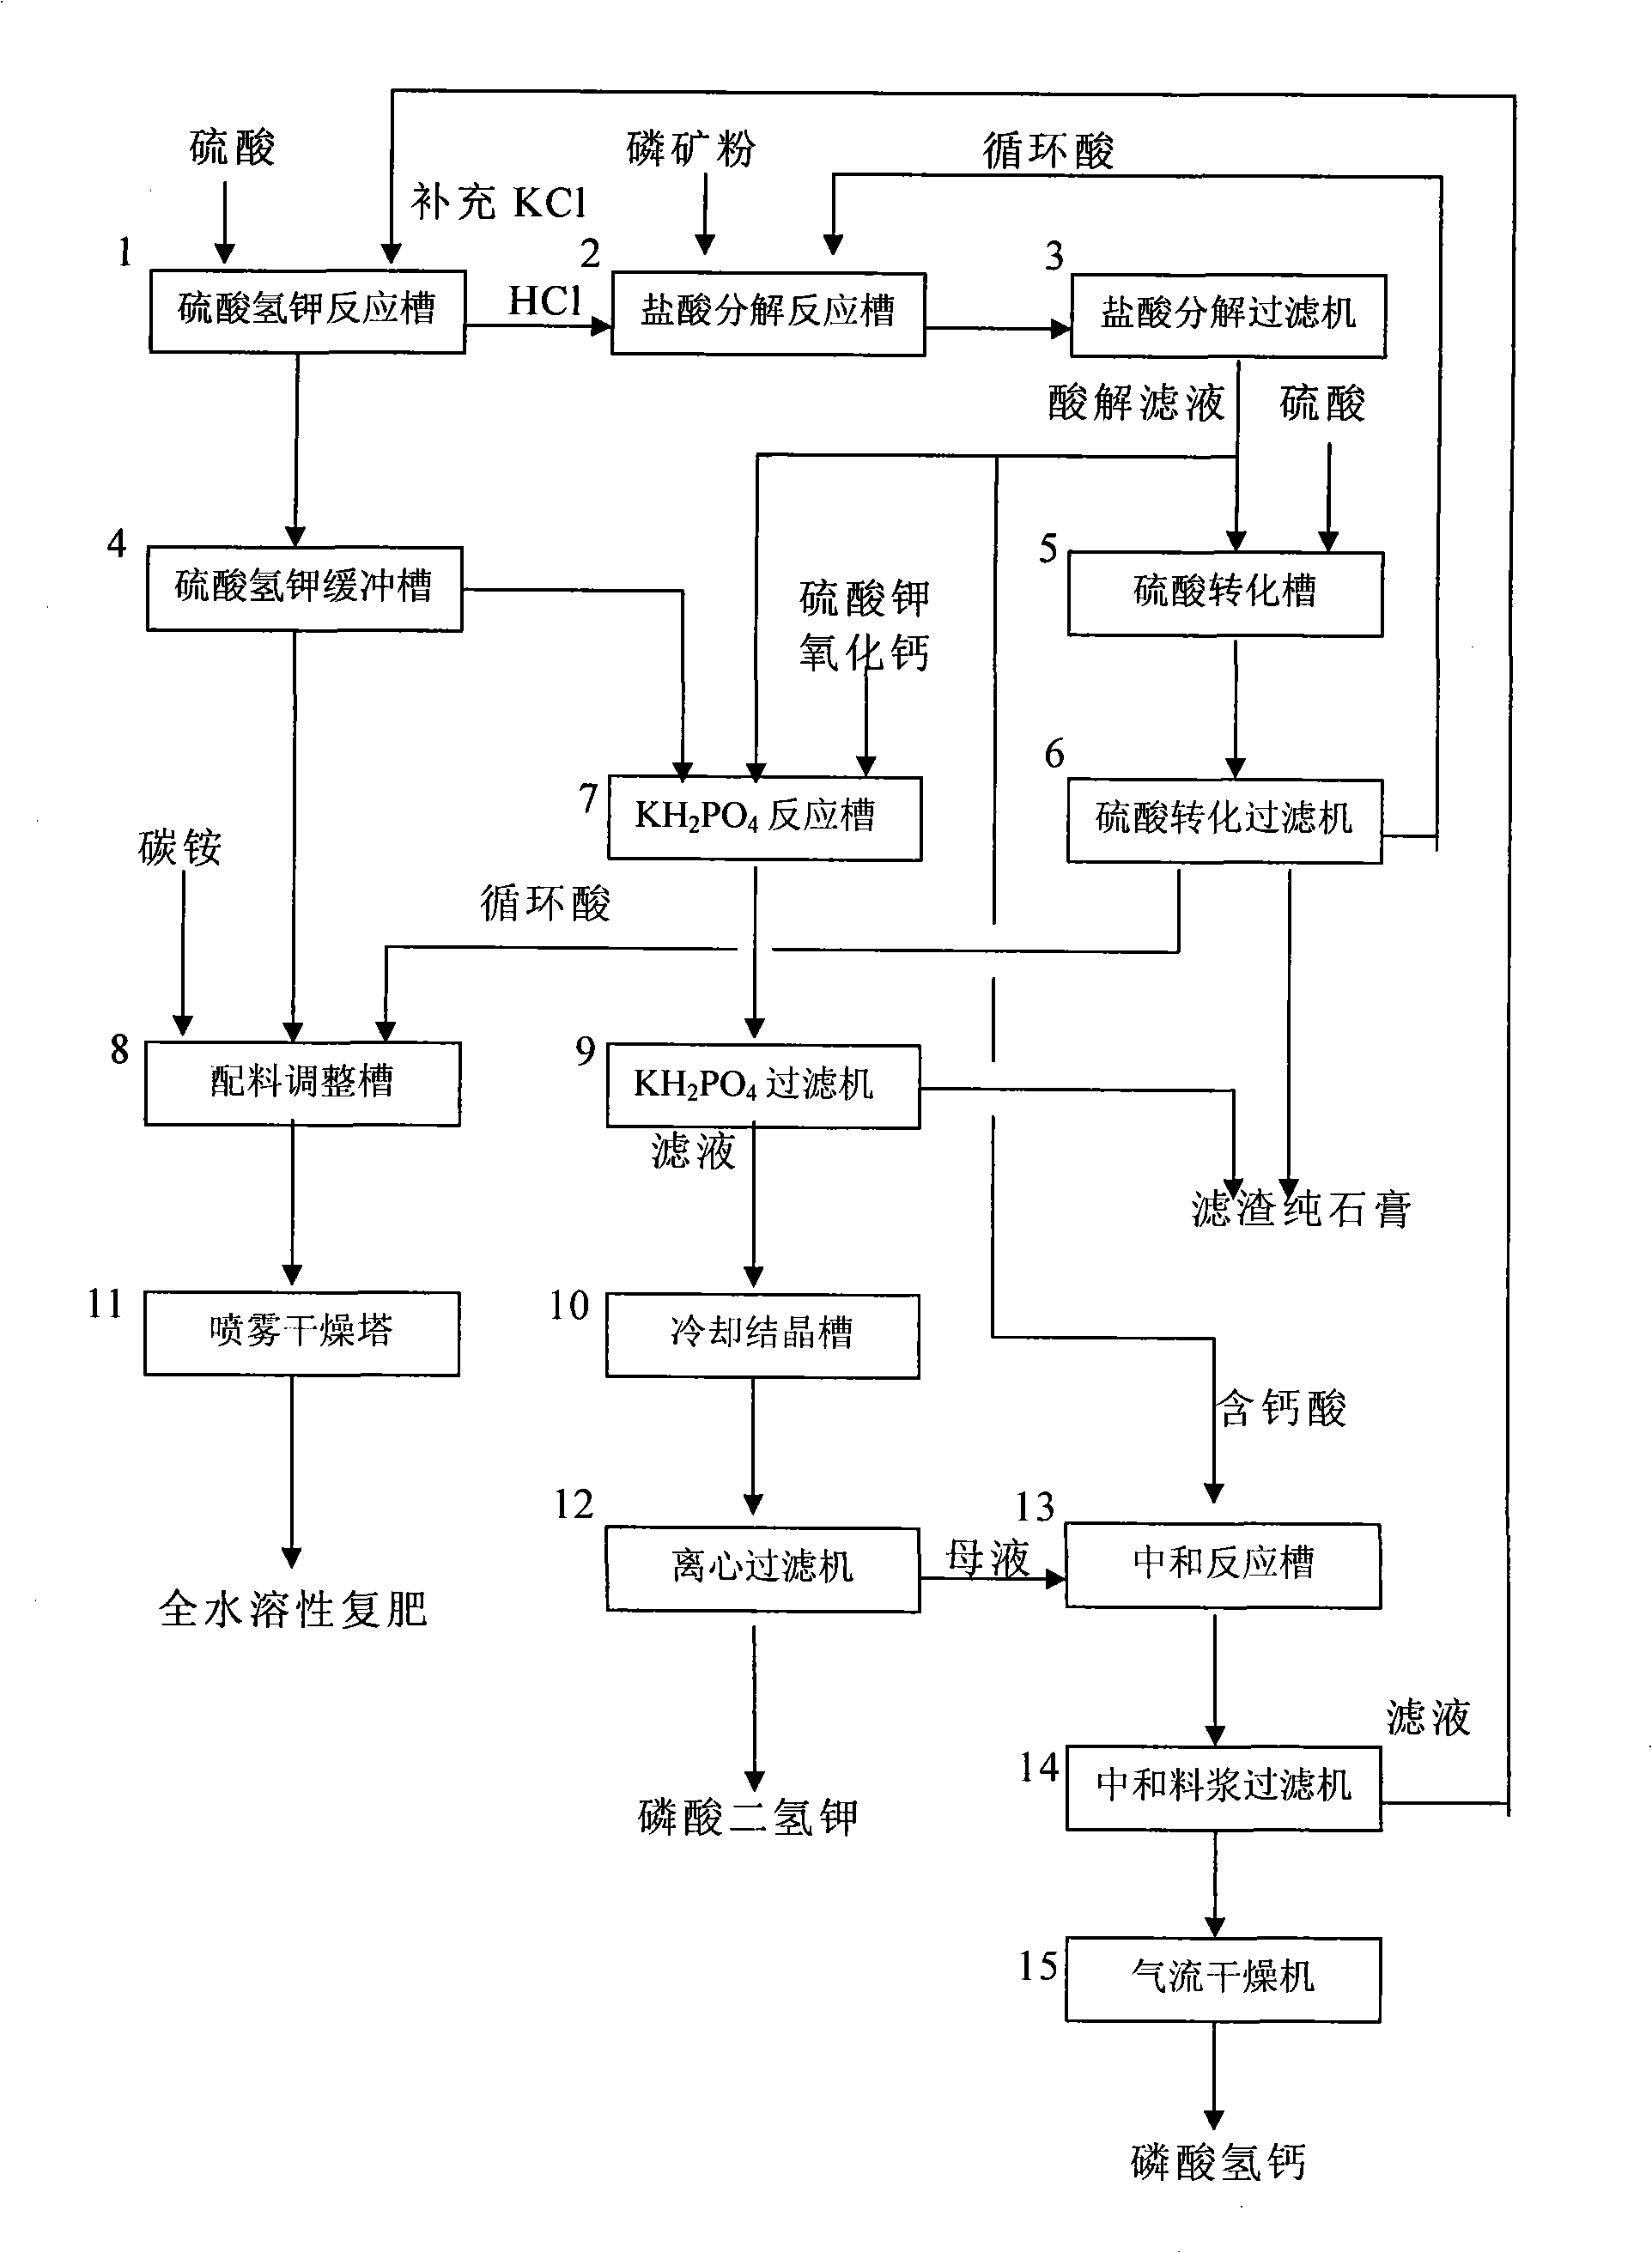 Process for disassembling phosphate ore by mixed acid and coproducing potassium dihydrogen phosphate, hydrogen phosphate and combined fertilizer